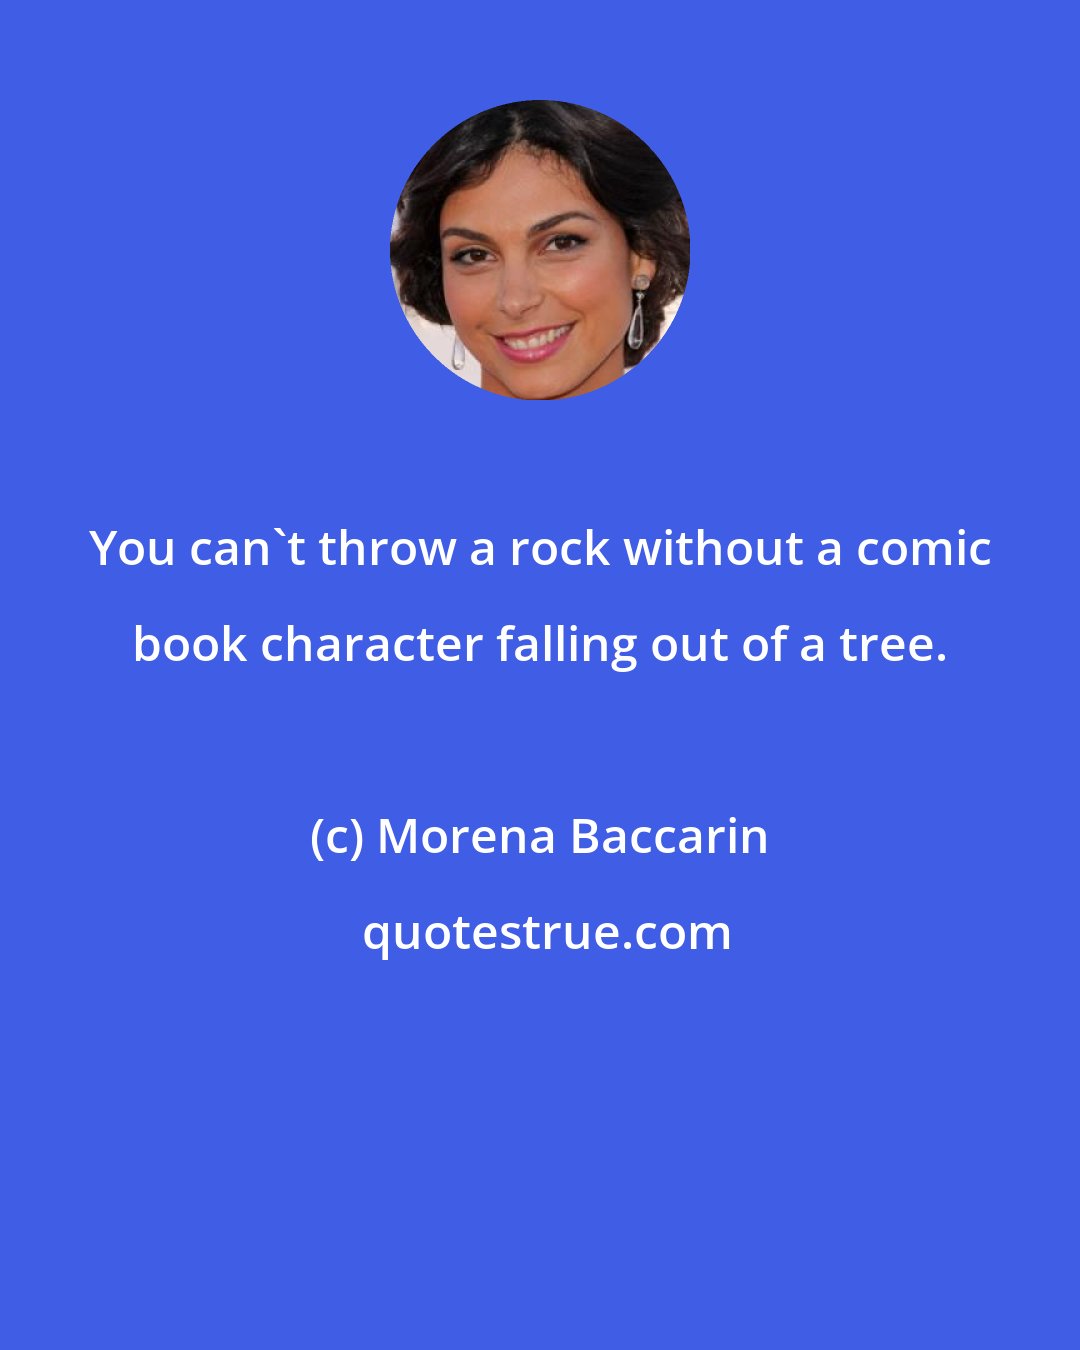 Morena Baccarin: You can't throw a rock without a comic book character falling out of a tree.